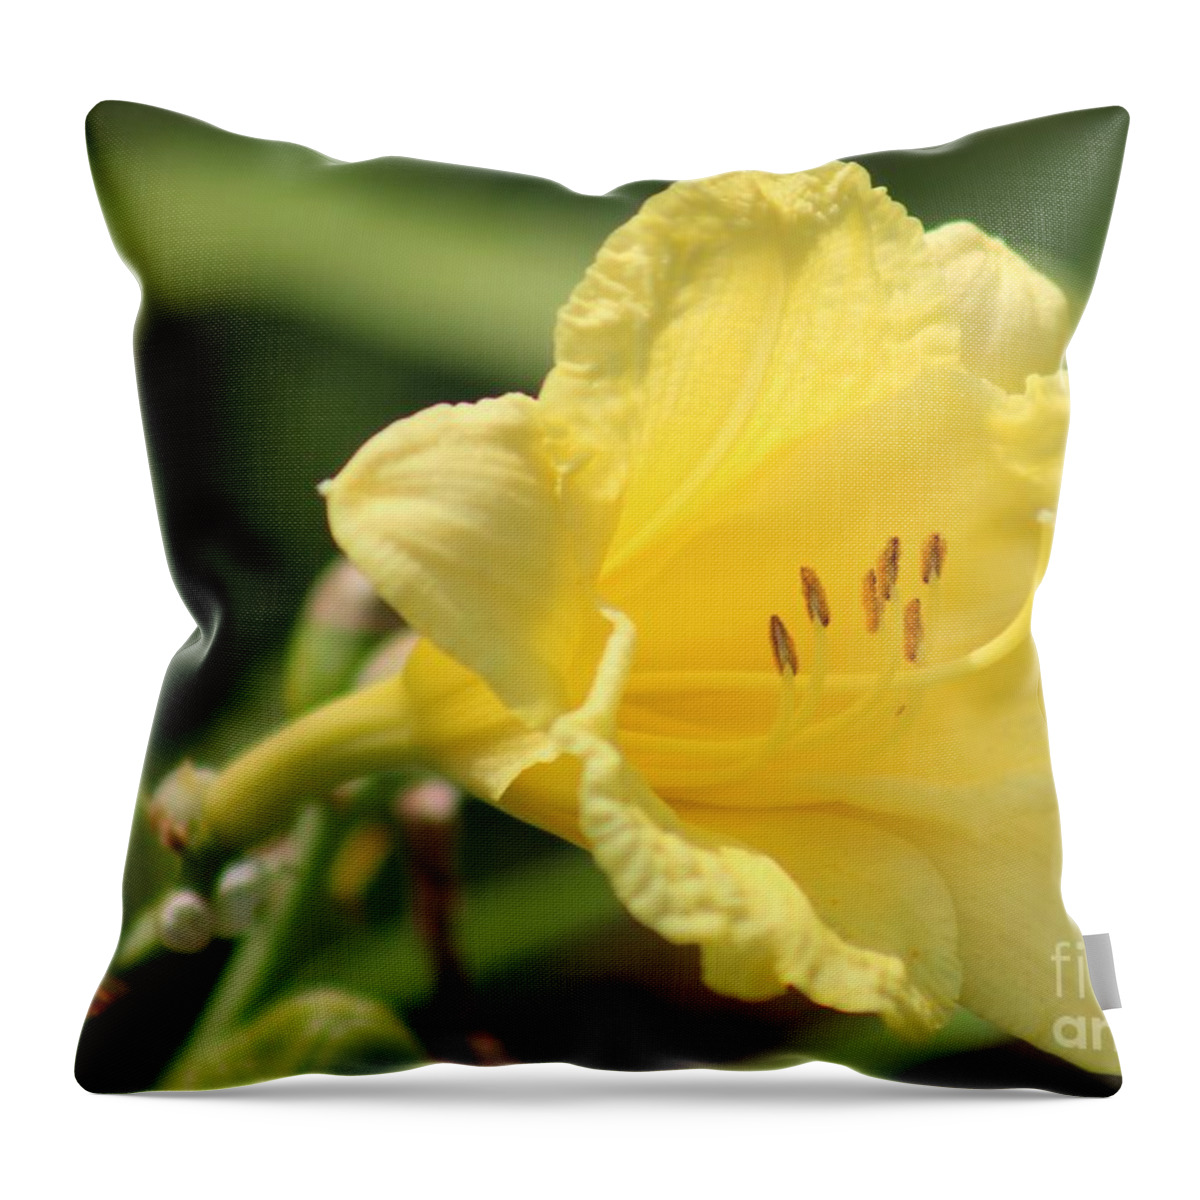 Yellow Throw Pillow featuring the photograph Nature's Beauty 46 by Deena Withycombe